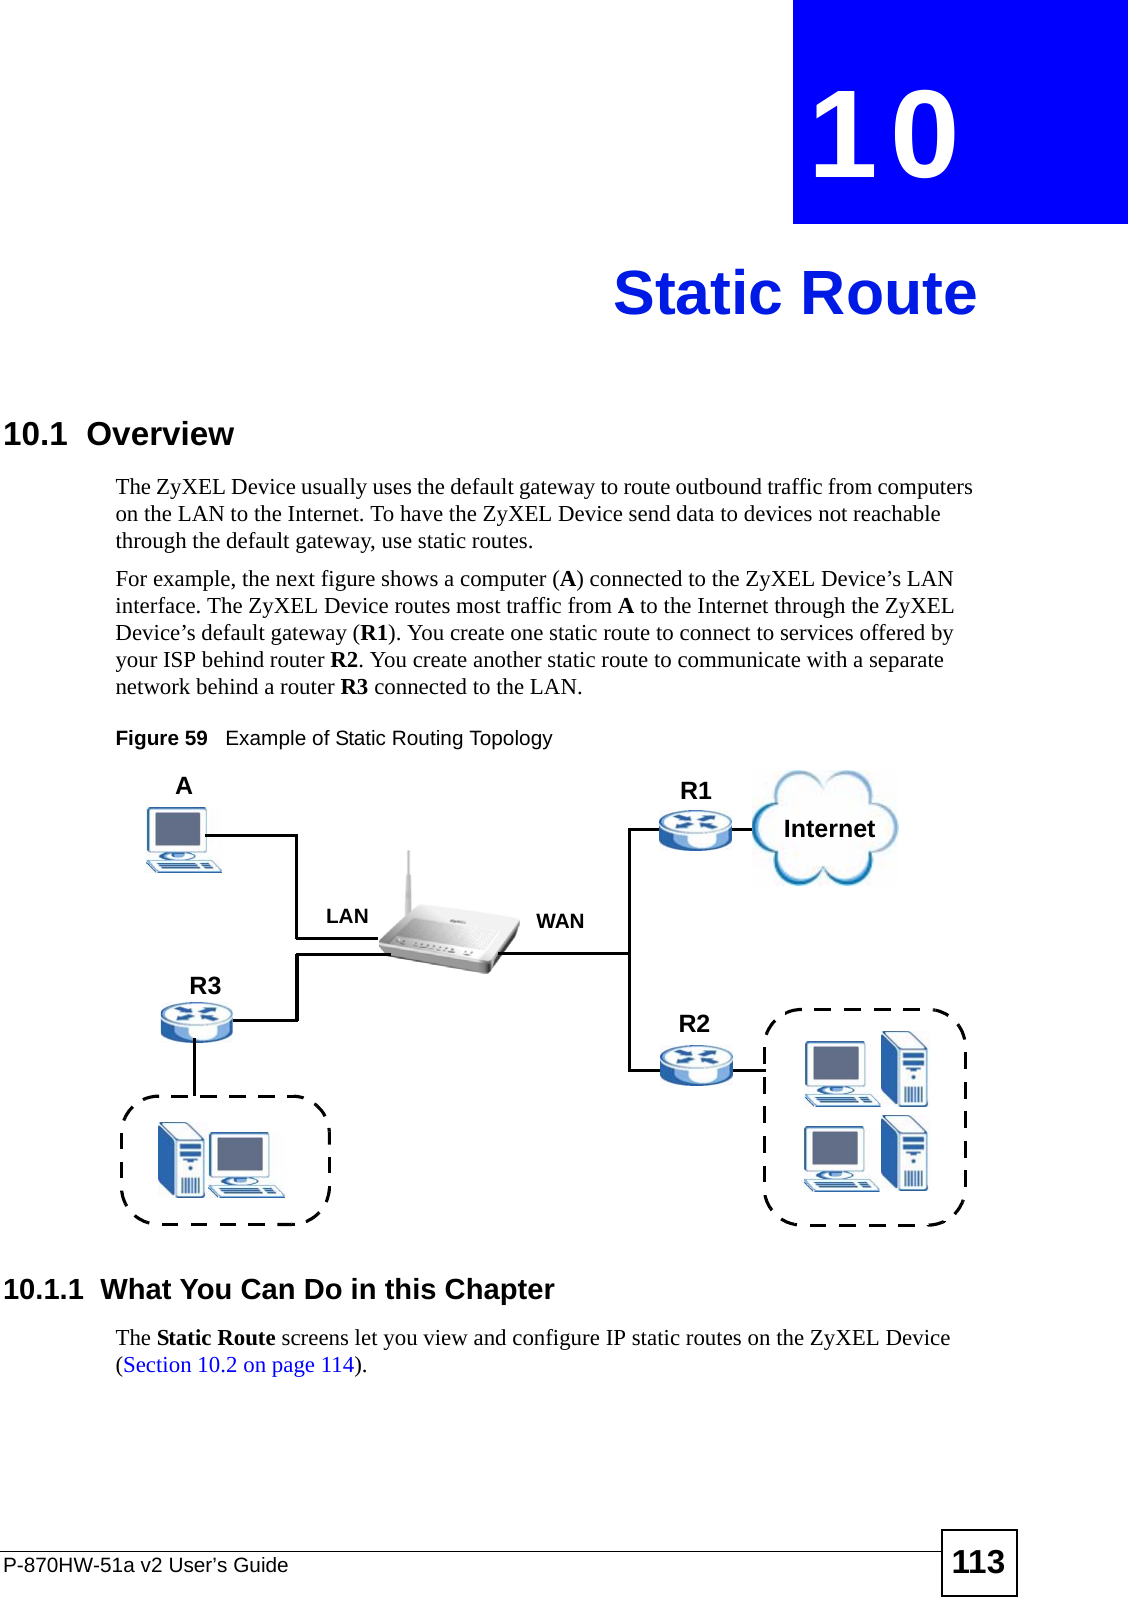 P-870HW-51a v2 User’s Guide 113CHAPTER  10 Static Route10.1  Overview   The ZyXEL Device usually uses the default gateway to route outbound traffic from computers on the LAN to the Internet. To have the ZyXEL Device send data to devices not reachable through the default gateway, use static routes.For example, the next figure shows a computer (A) connected to the ZyXEL Device’s LAN interface. The ZyXEL Device routes most traffic from A to the Internet through the ZyXEL Device’s default gateway (R1). You create one static route to connect to services offered by your ISP behind router R2. You create another static route to communicate with a separate network behind a router R3 connected to the LAN.   Figure 59   Example of Static Routing Topology10.1.1  What You Can Do in this ChapterThe Static Route screens let you view and configure IP static routes on the ZyXEL Device (Section 10.2 on page 114).WANR1R2AR3LANInternet